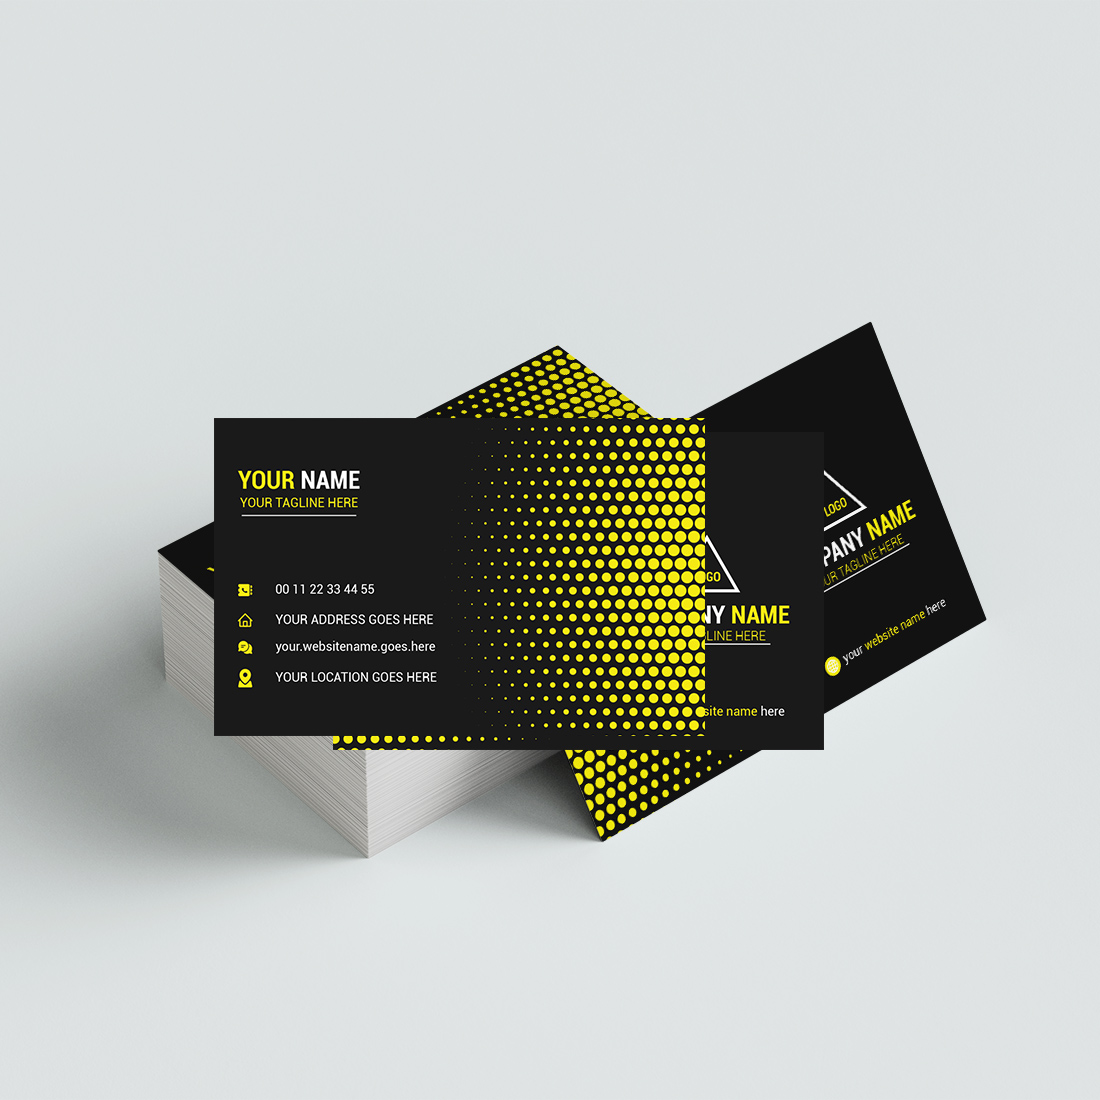 modern abstract black color unique corporate business card design template cover image.